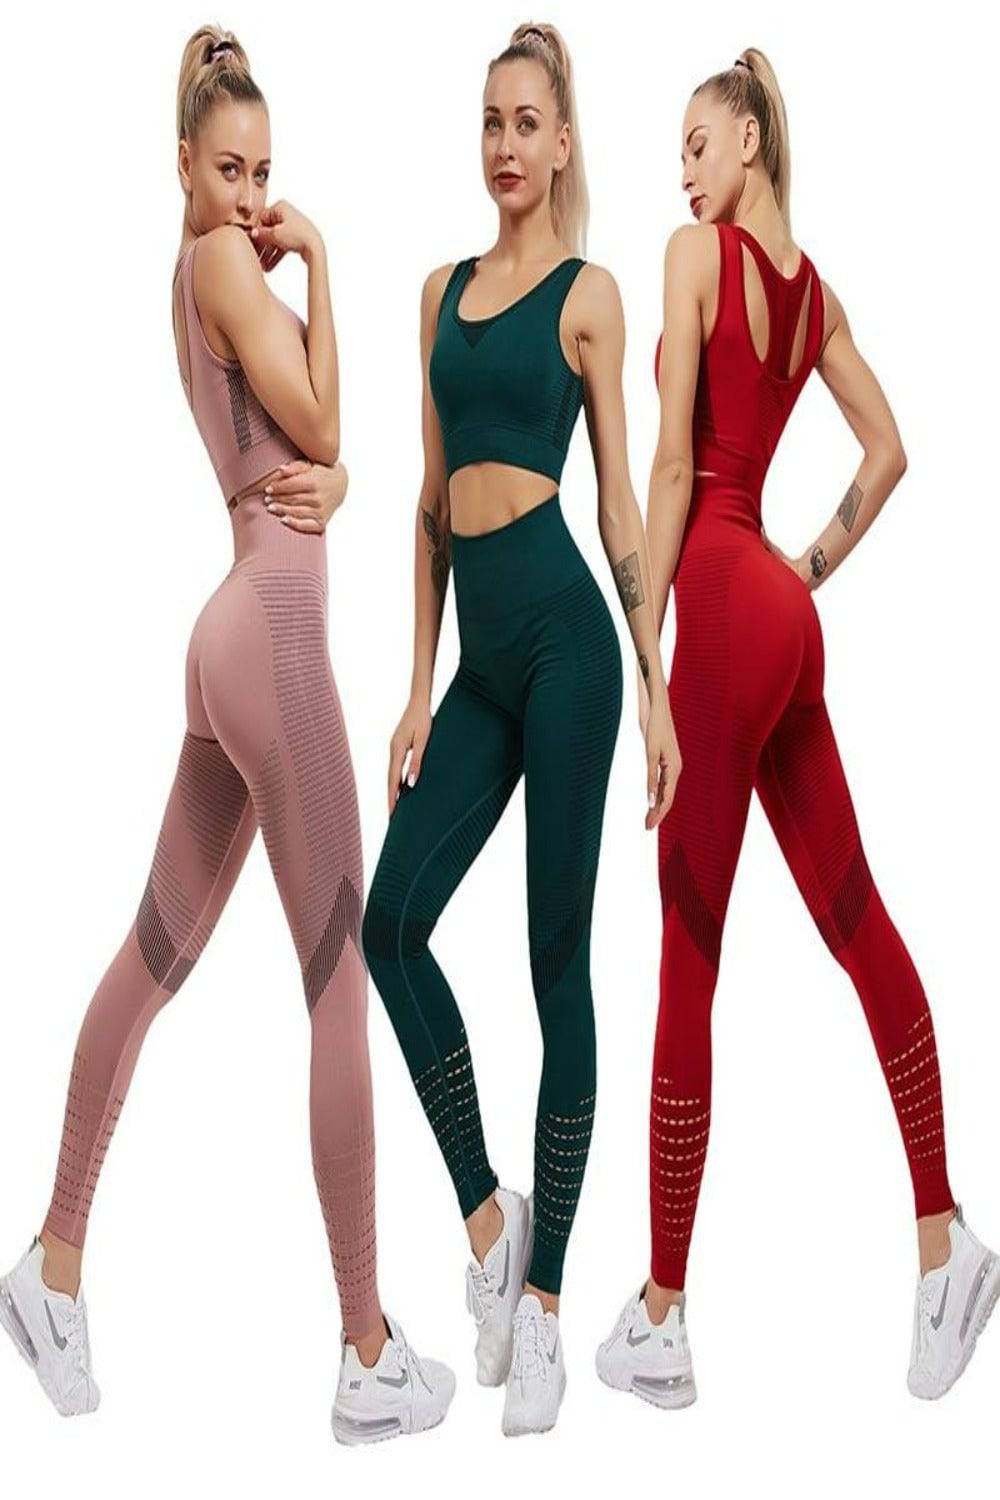 Hollow Out Seamless Yoga Set Sport Outfits Women Black Two 2 Piece Crop Top  Bra Leggings Workout Gym Suit Fitness Sport Sets (Color : Wine Red, Size 